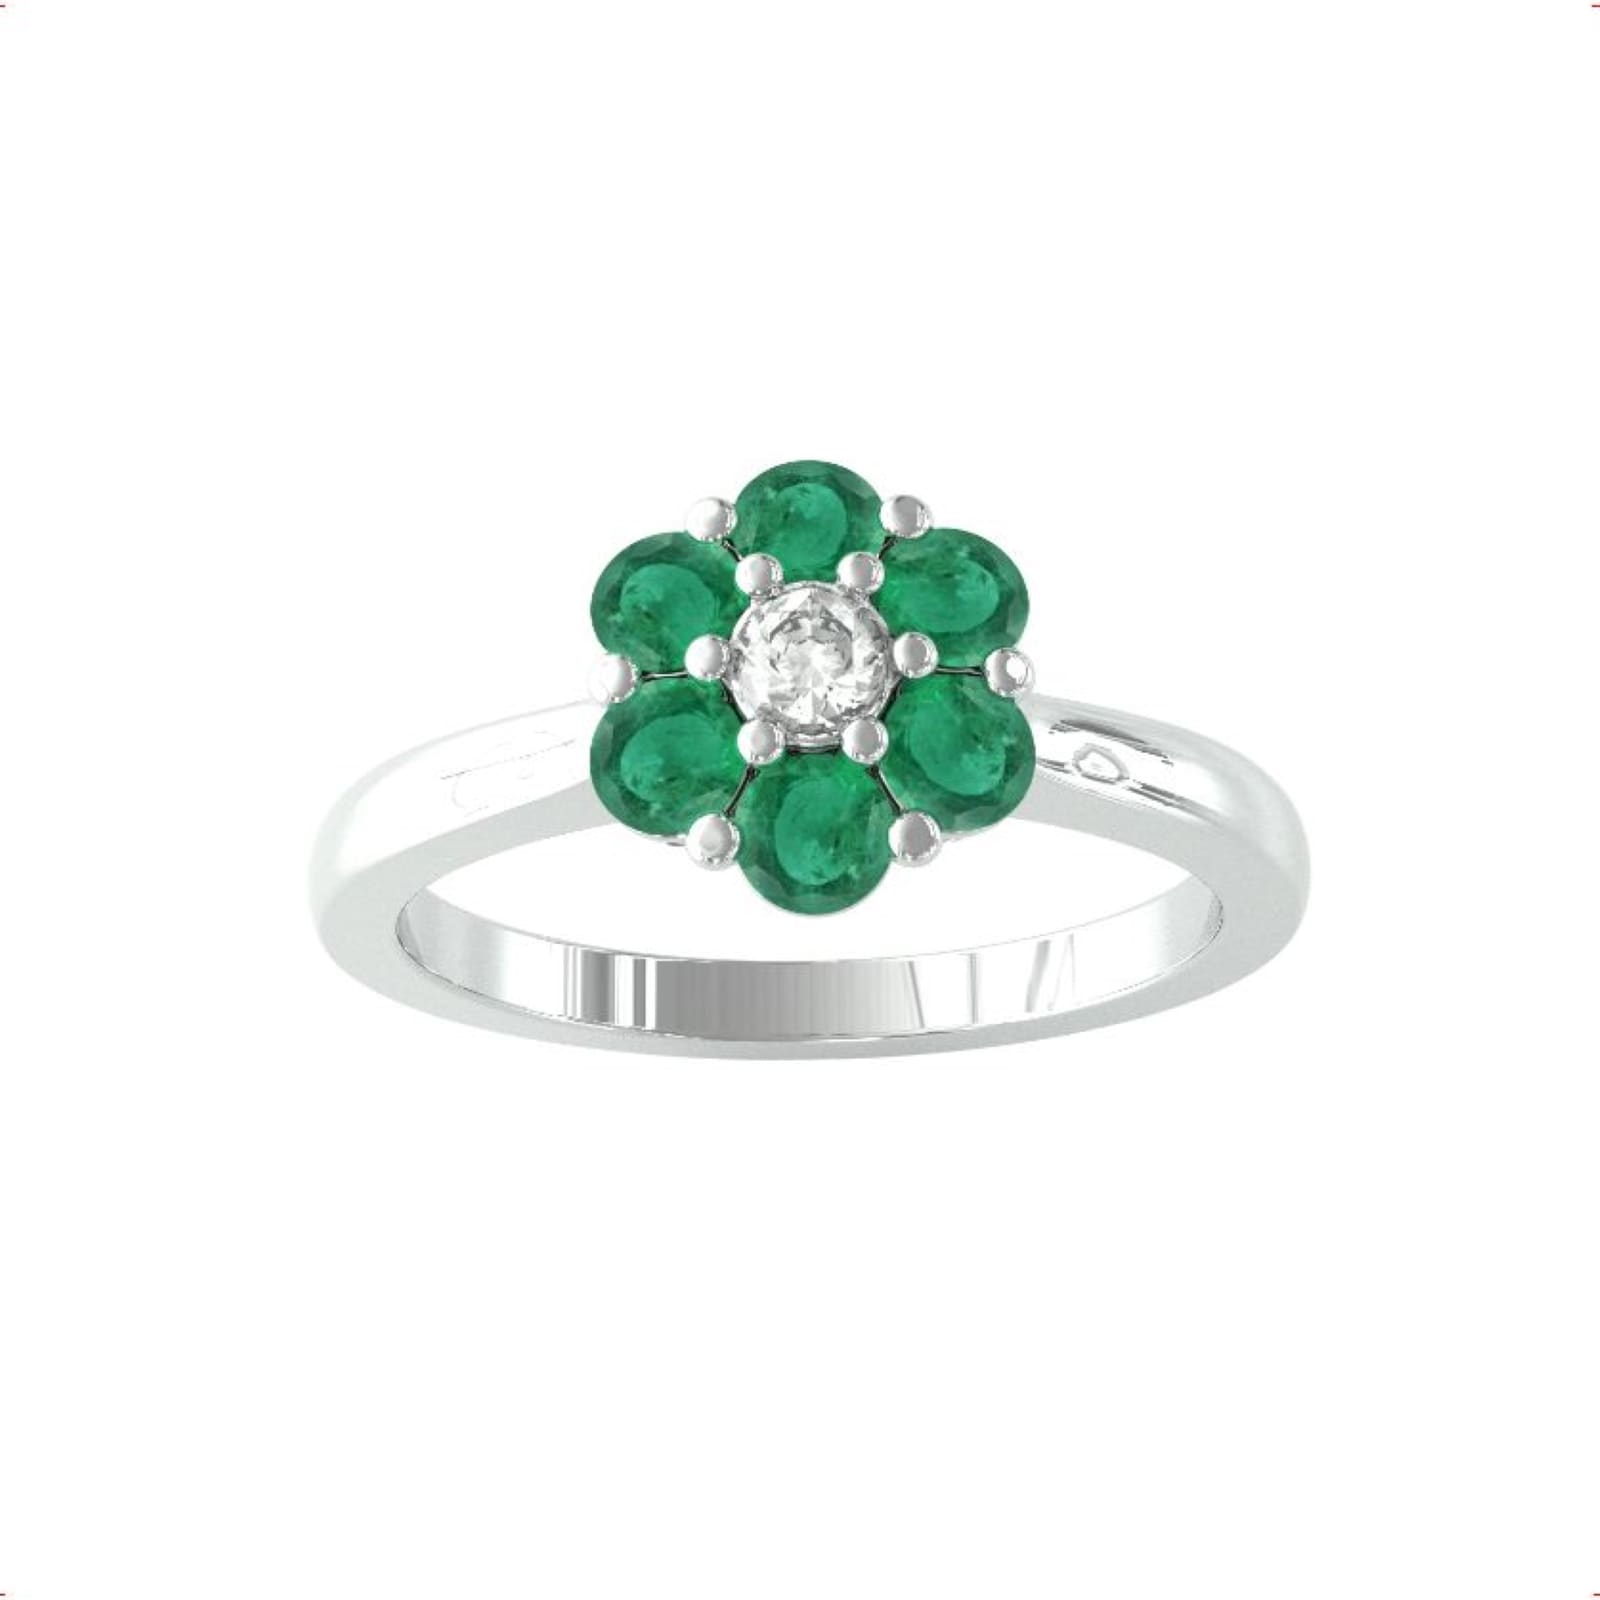 9ct White Gold Emerald & Diamond Cluster Ring - Ring Size E.5